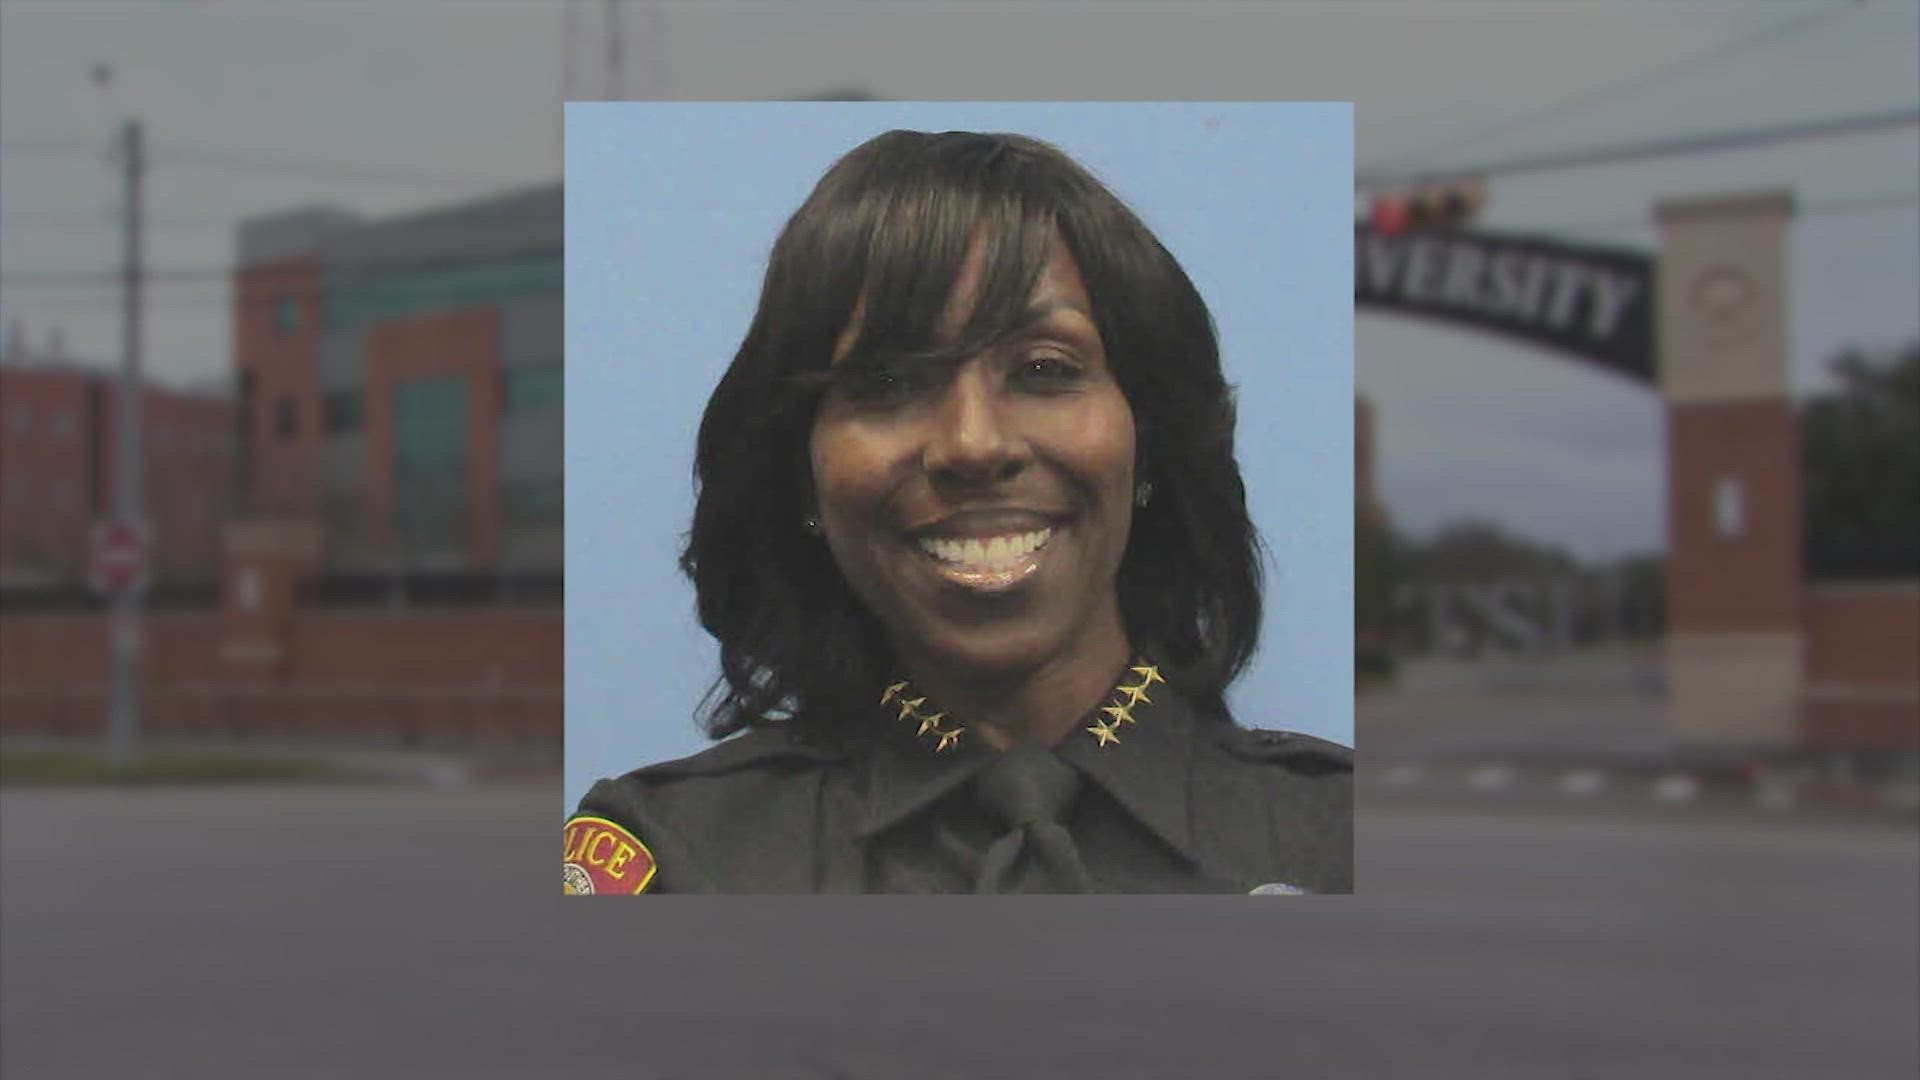 “This woman had an unblemished record at HPD, nearly two decades,” the chief's attorney said. “People were dying to have her as police chief.”